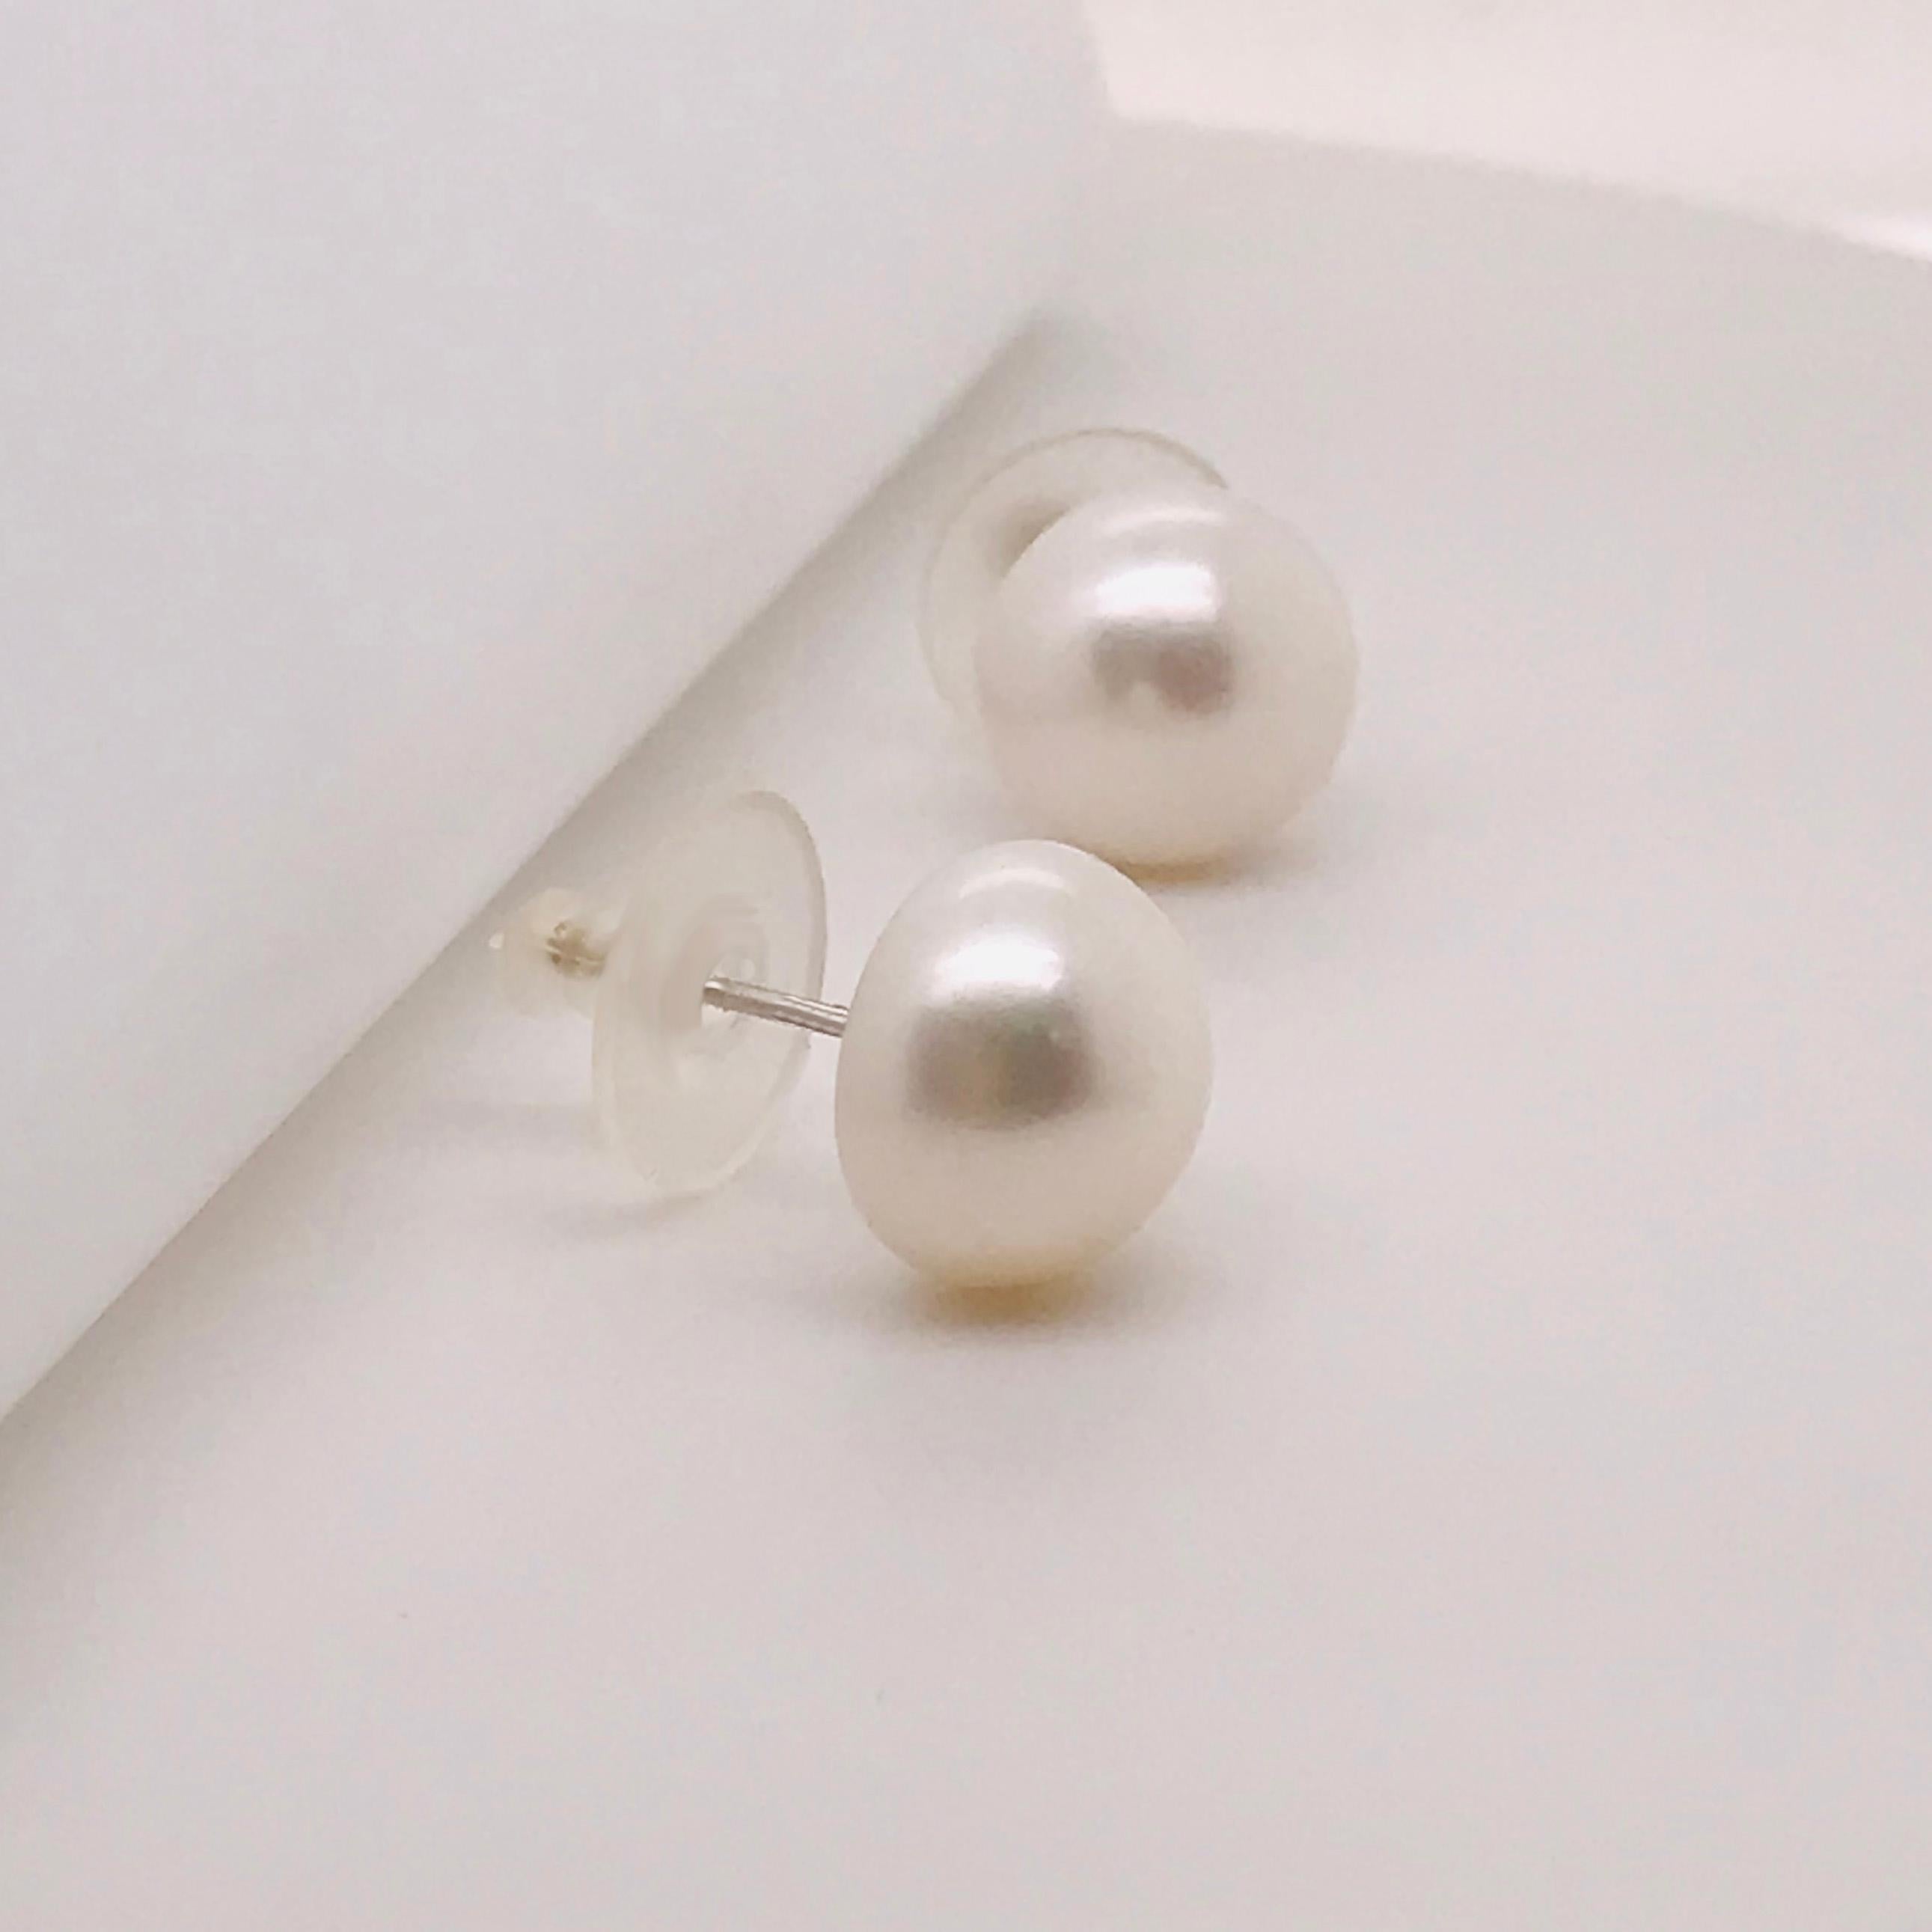 Pearl earrings are a must have in any fine jewelry collection! Like tennis bracelets and diamond pendants, they are a staple! 
My first pair of stud earrings were given to me on my graduation by my grandmother. They were the pearls her mother gave